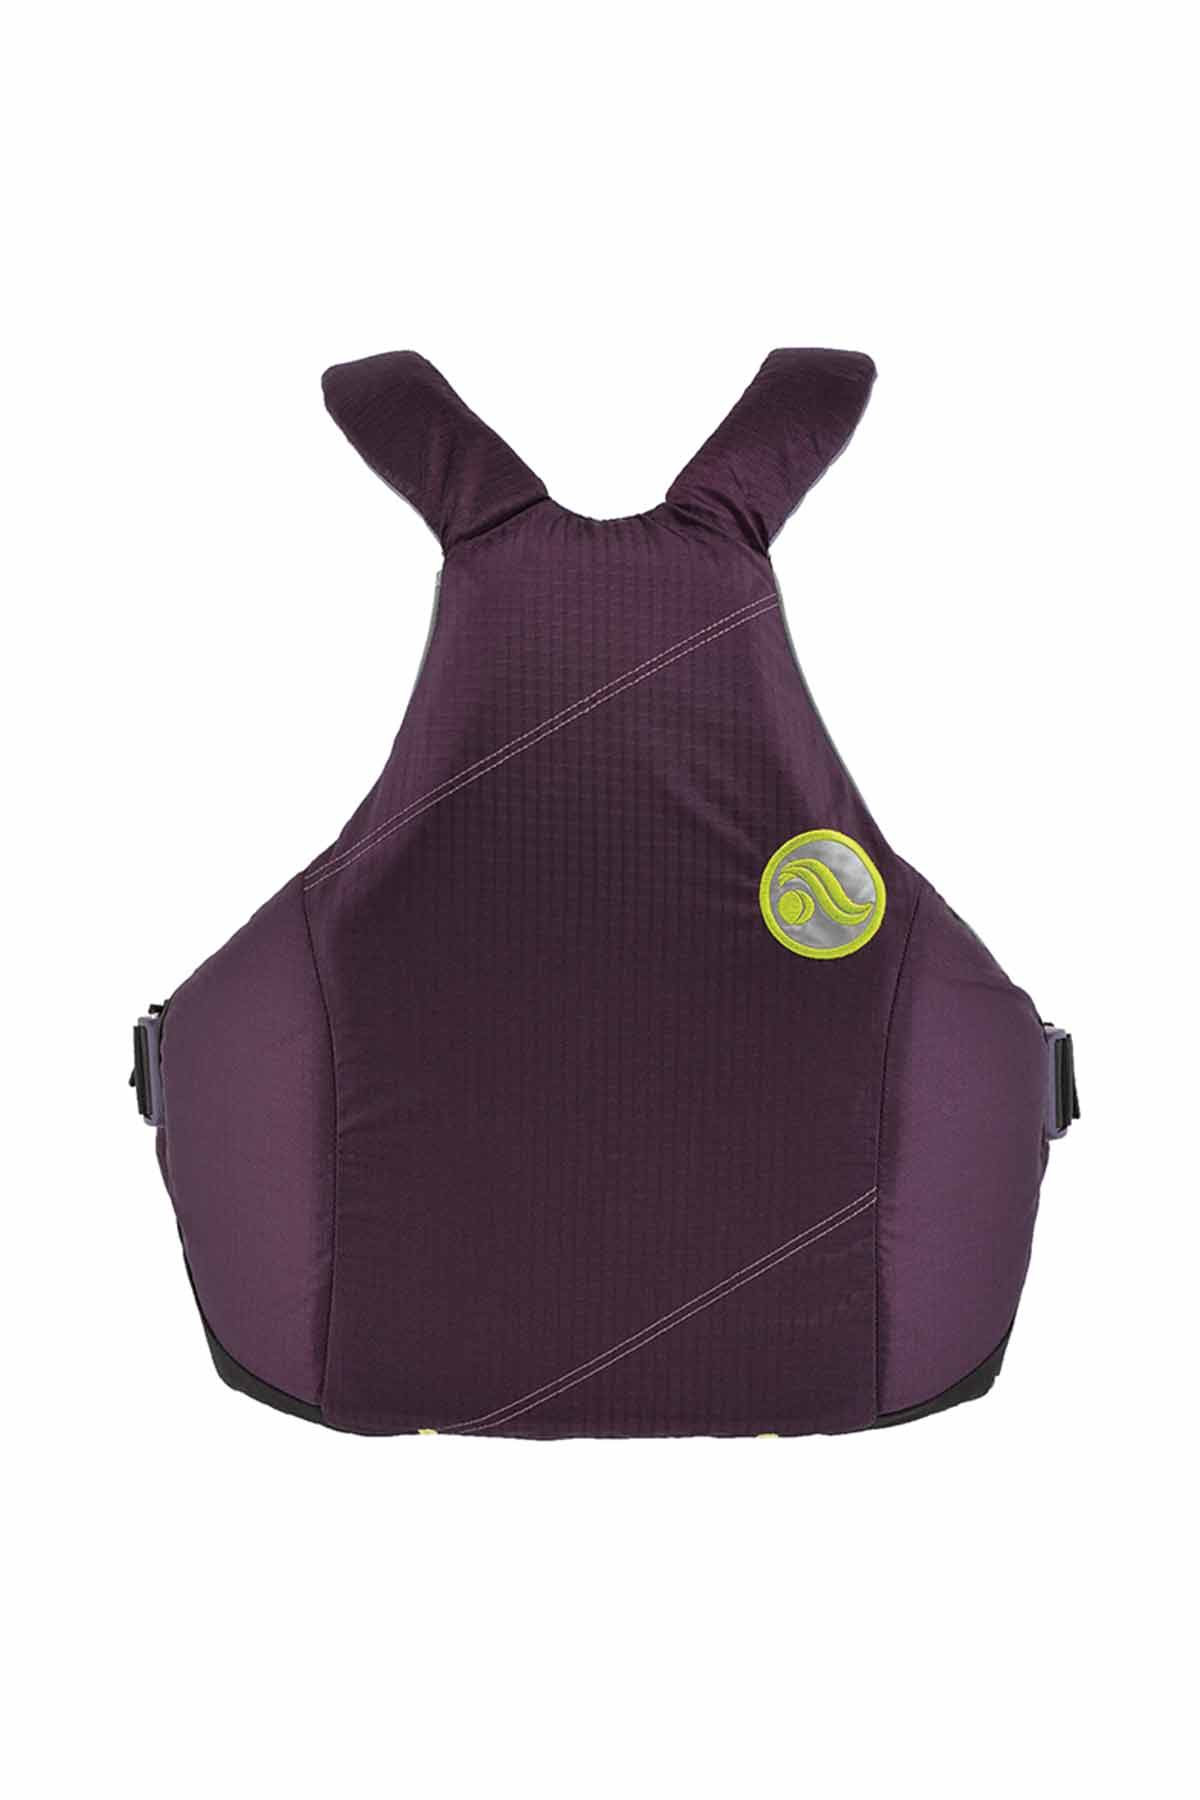 Astral Whitewater YTV PFD Eggplant Back View